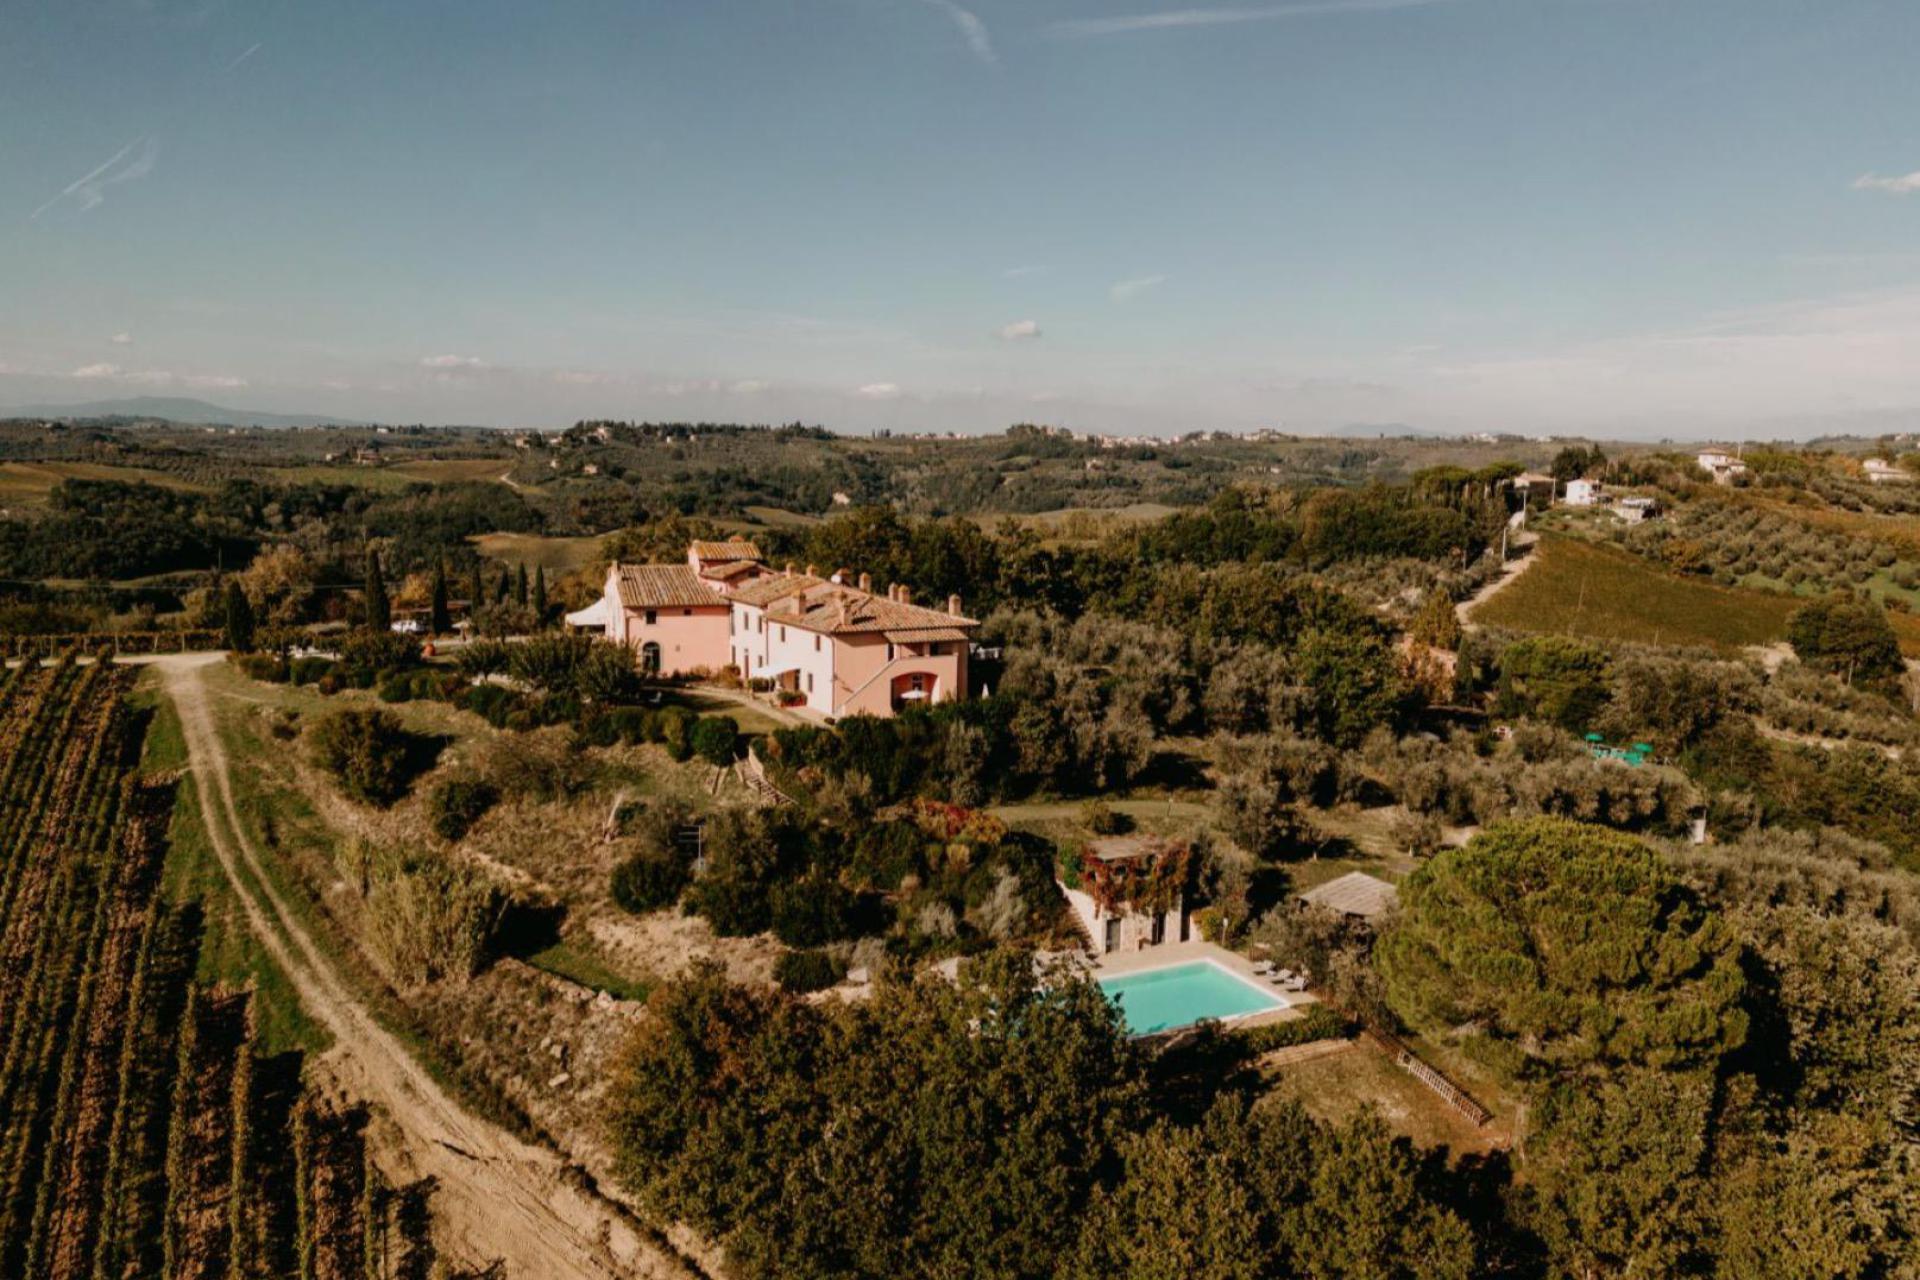 Agriturismo on a hilltop in the Chianti region